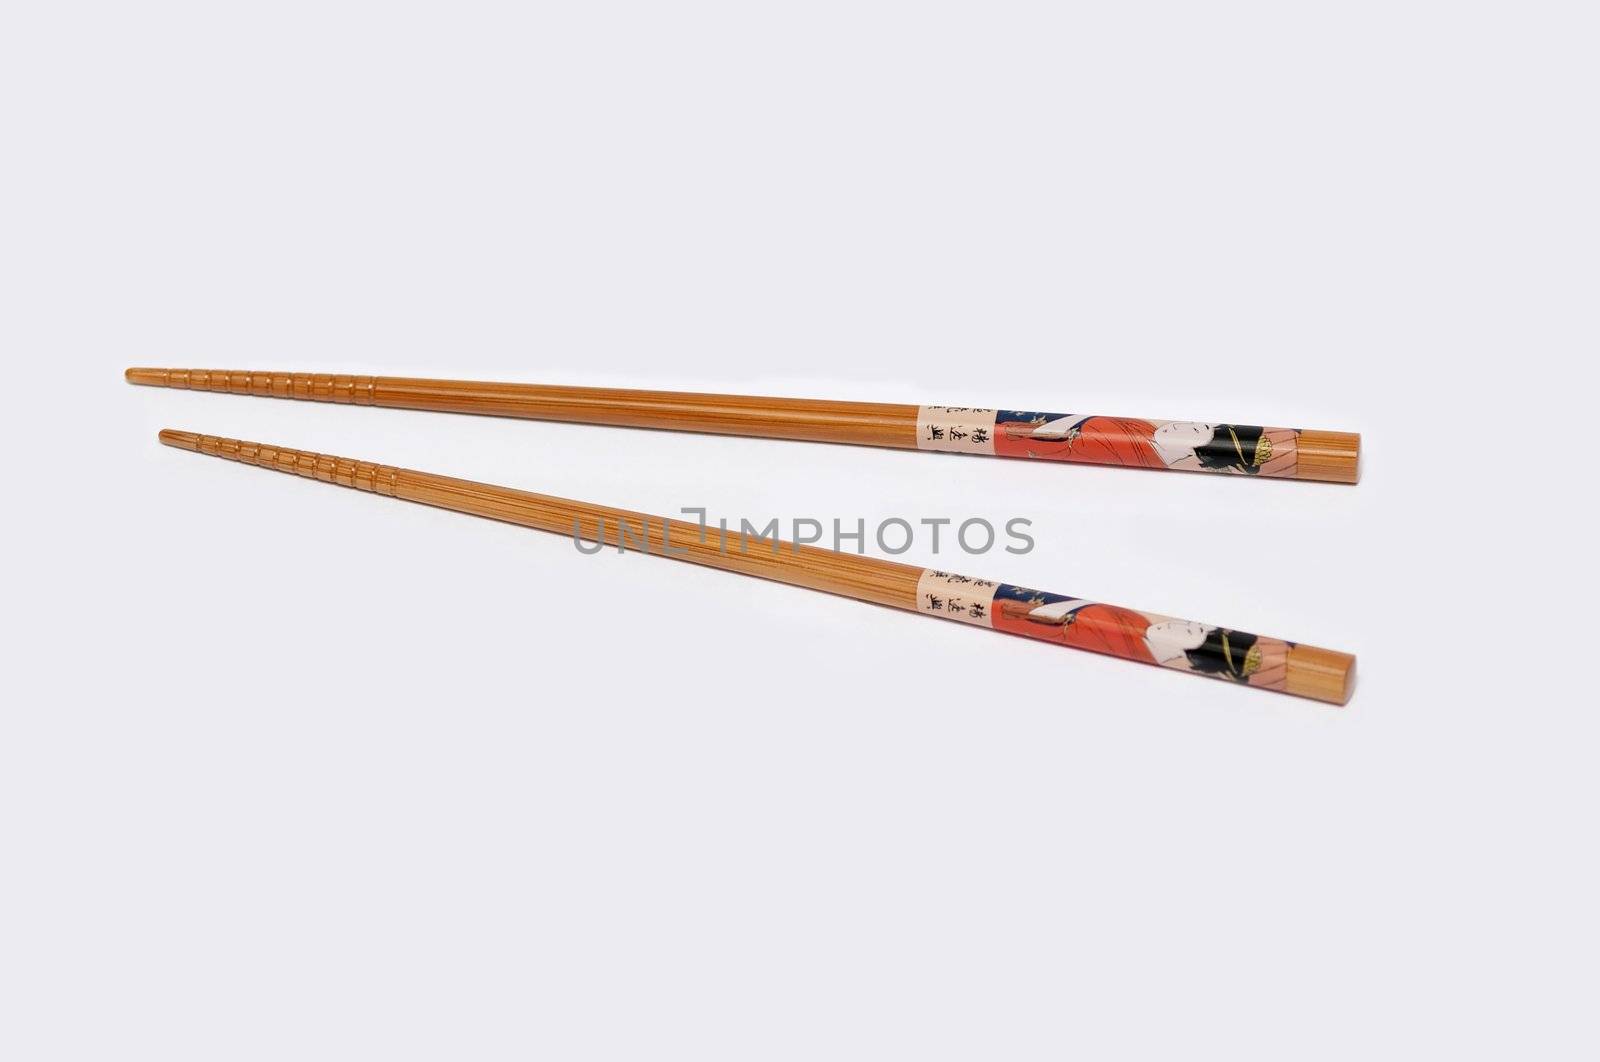 An image of chinese sticks